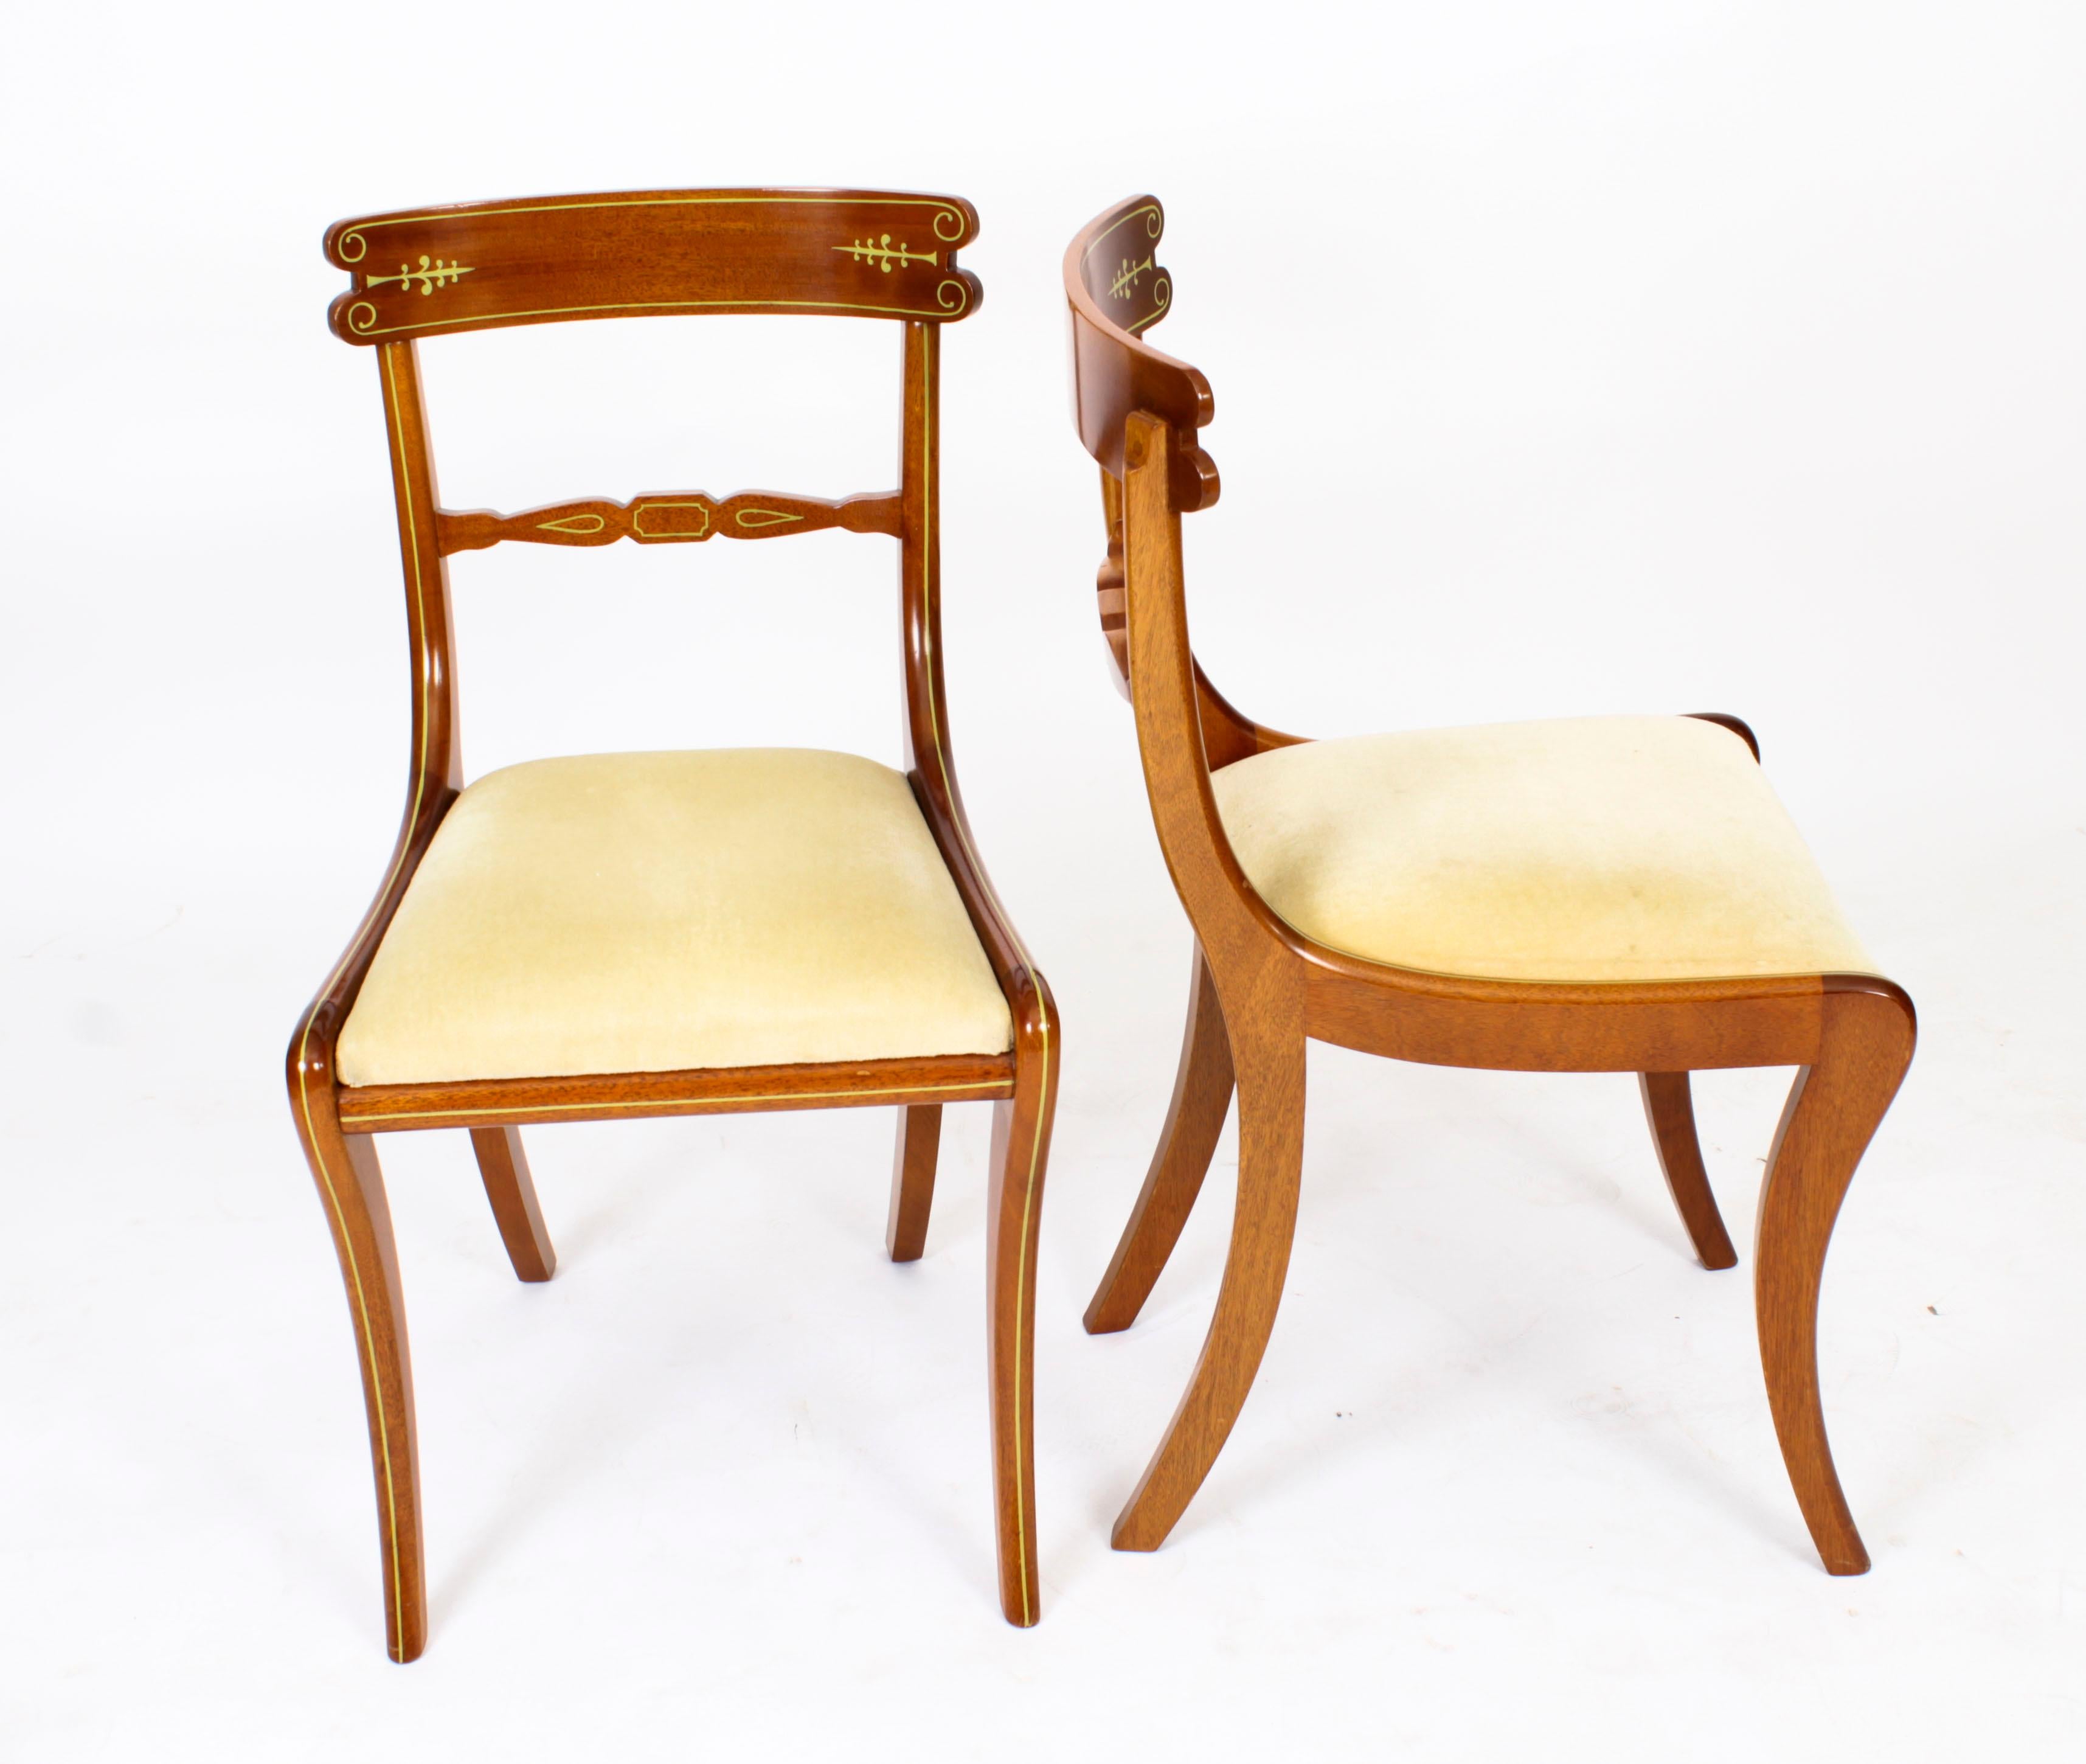 English Vintage Set 4 Regency Revival Dining Chairs by William Tillman 20th C